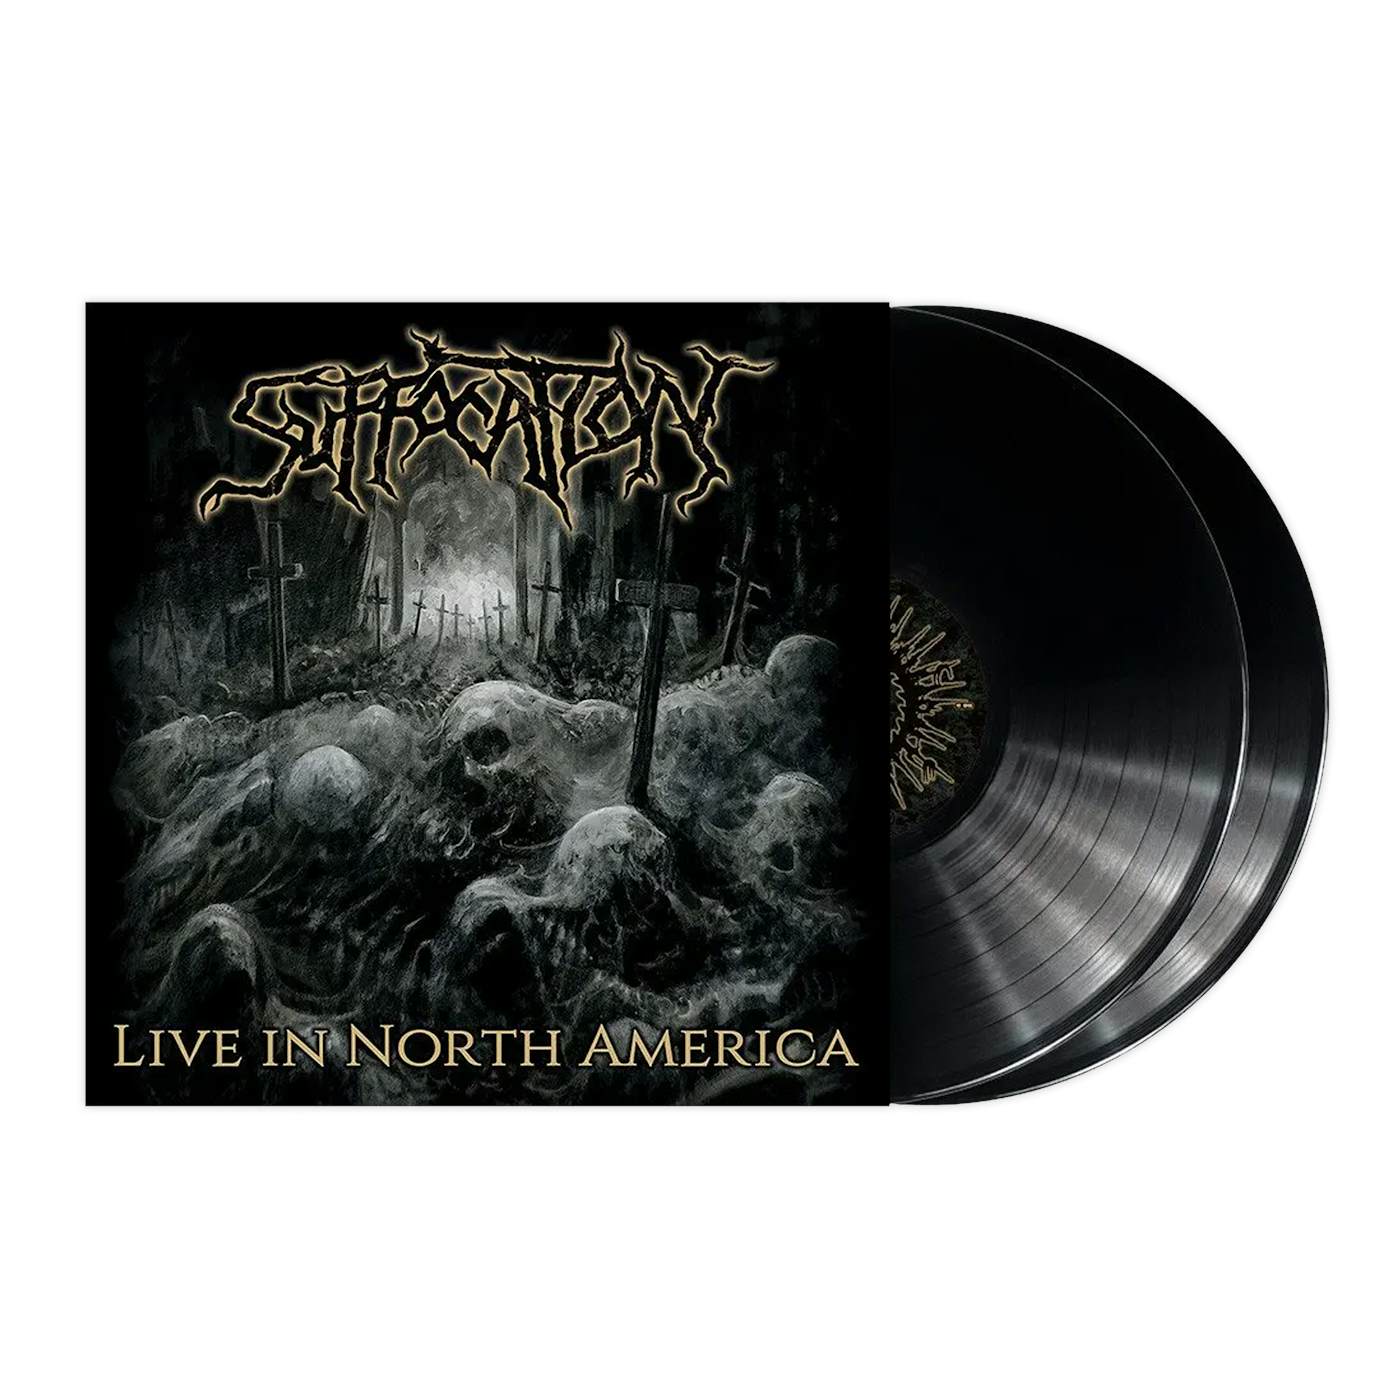 Suffocation - "Live In North America" 2xLP